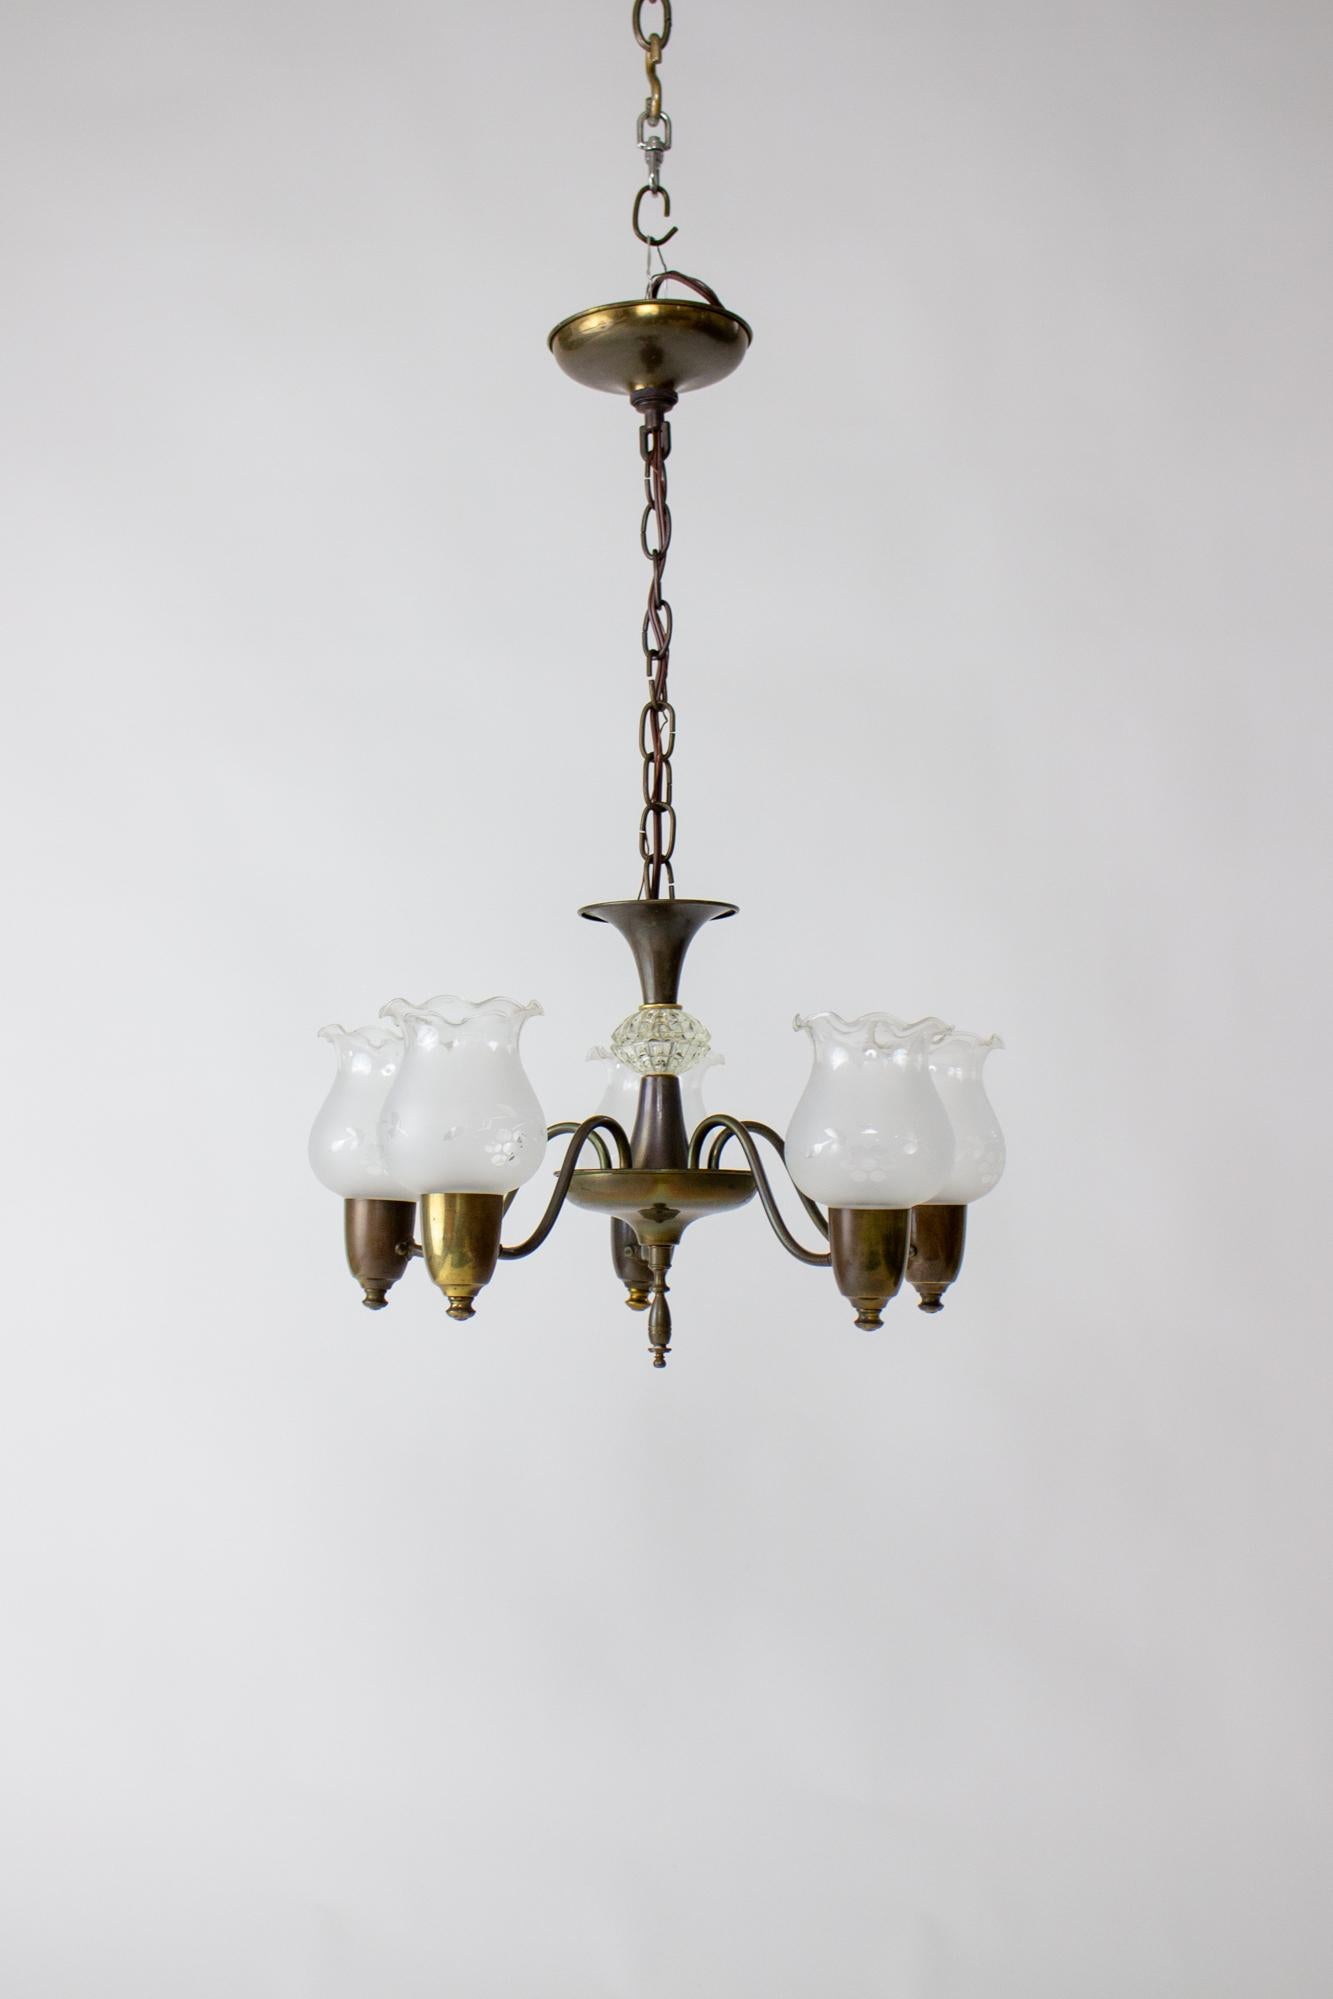 1930’s Five Light Art Deco Chandelier. Brass with an aged patina. Glass piece in stem. Frilly frosted glass shades with etched grape pattern. American, C. 1930

Condition: Aged brass patina, cleaned and wax polished. Rewired and ready for